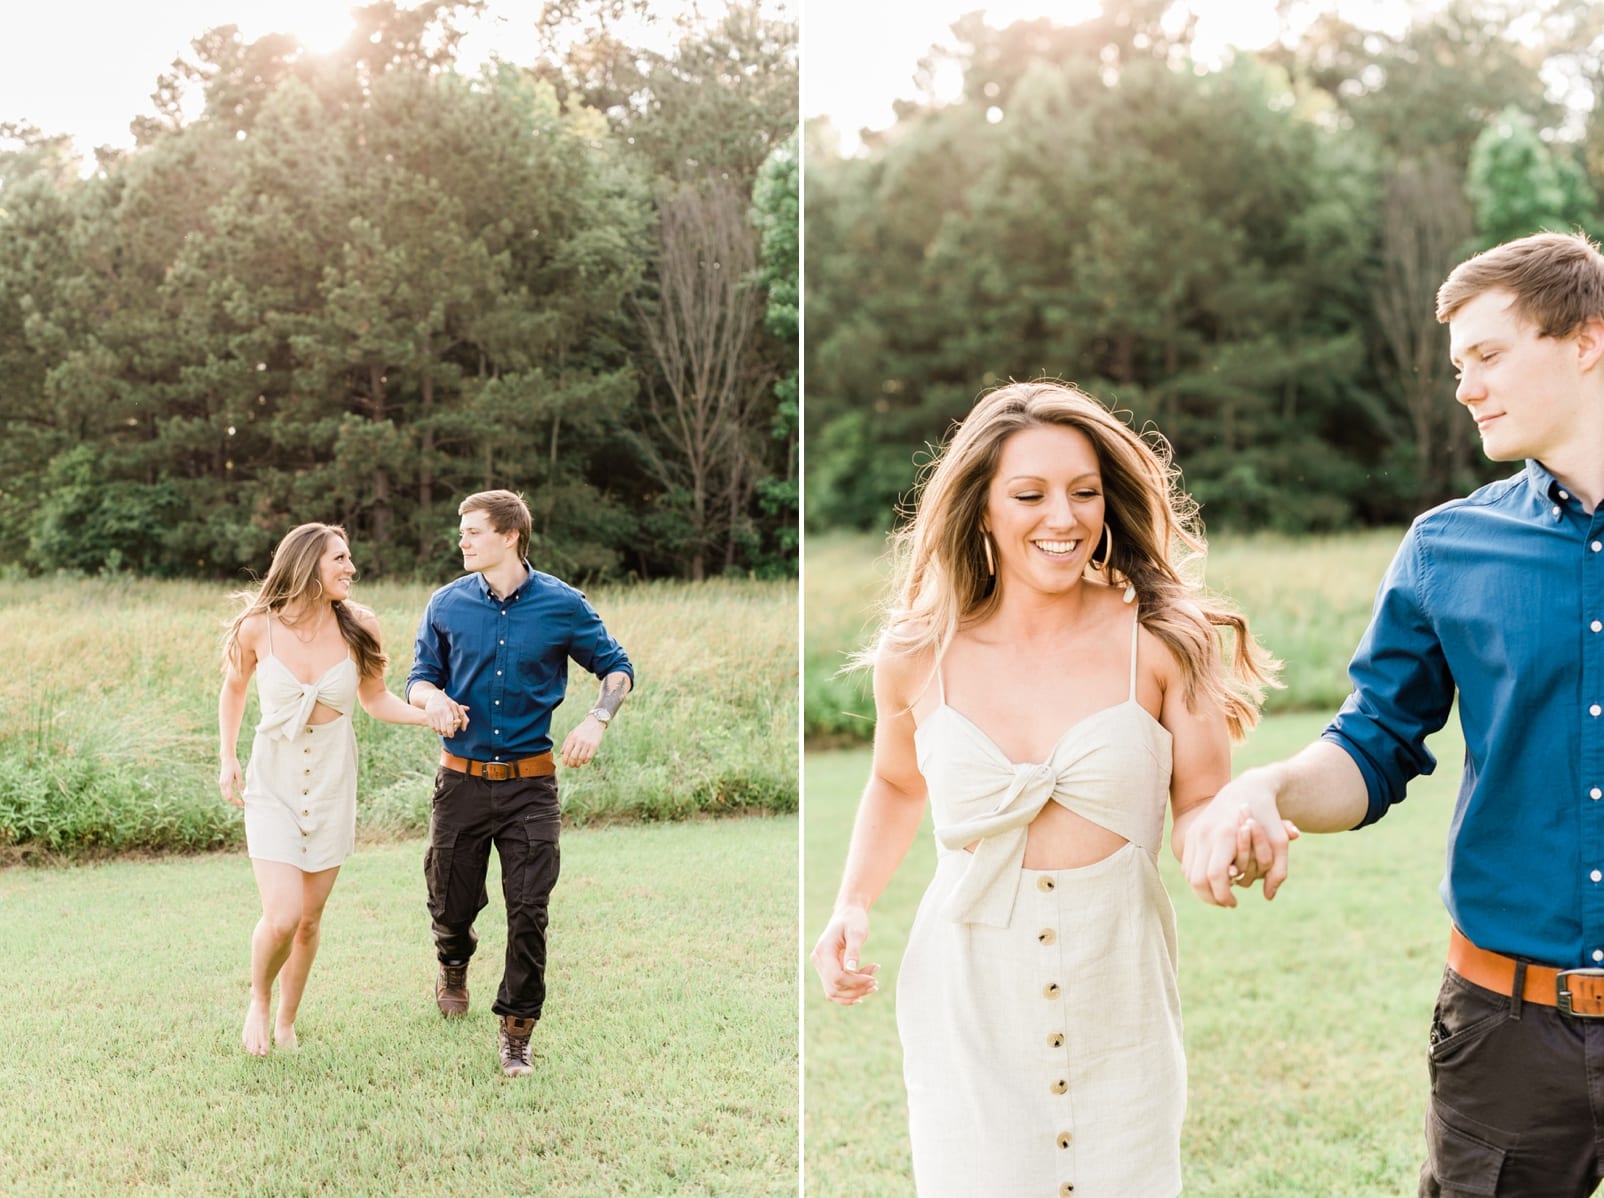 Raleigh engagement photos with bride in a tan linen dress with a tie top and buttons down the skirt photo